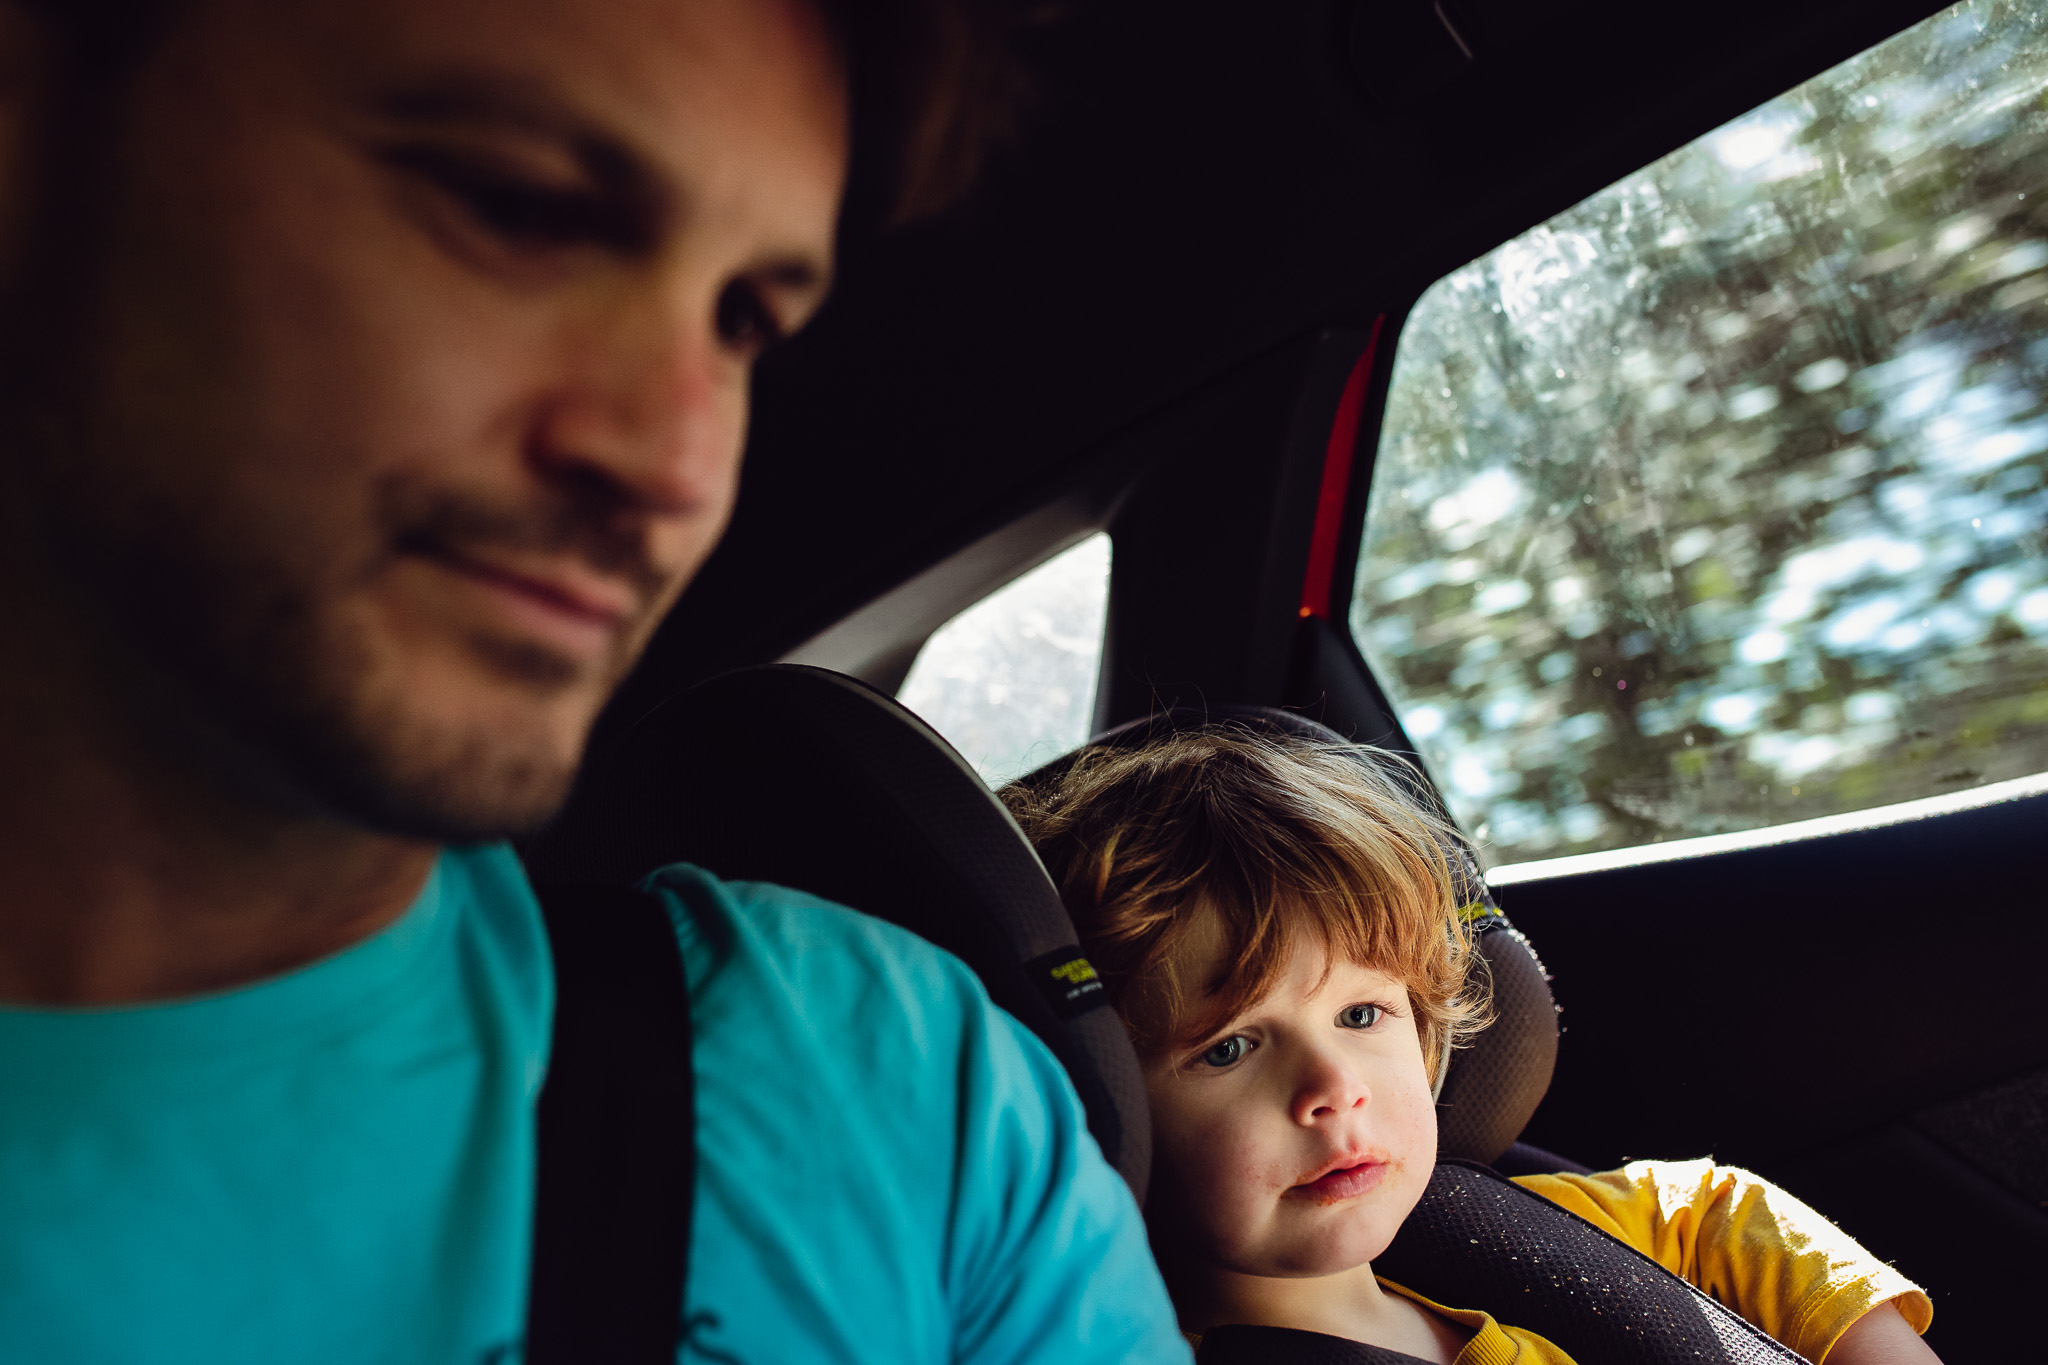 Dad and young boy travelling in the backseat of a car during a family photo session.